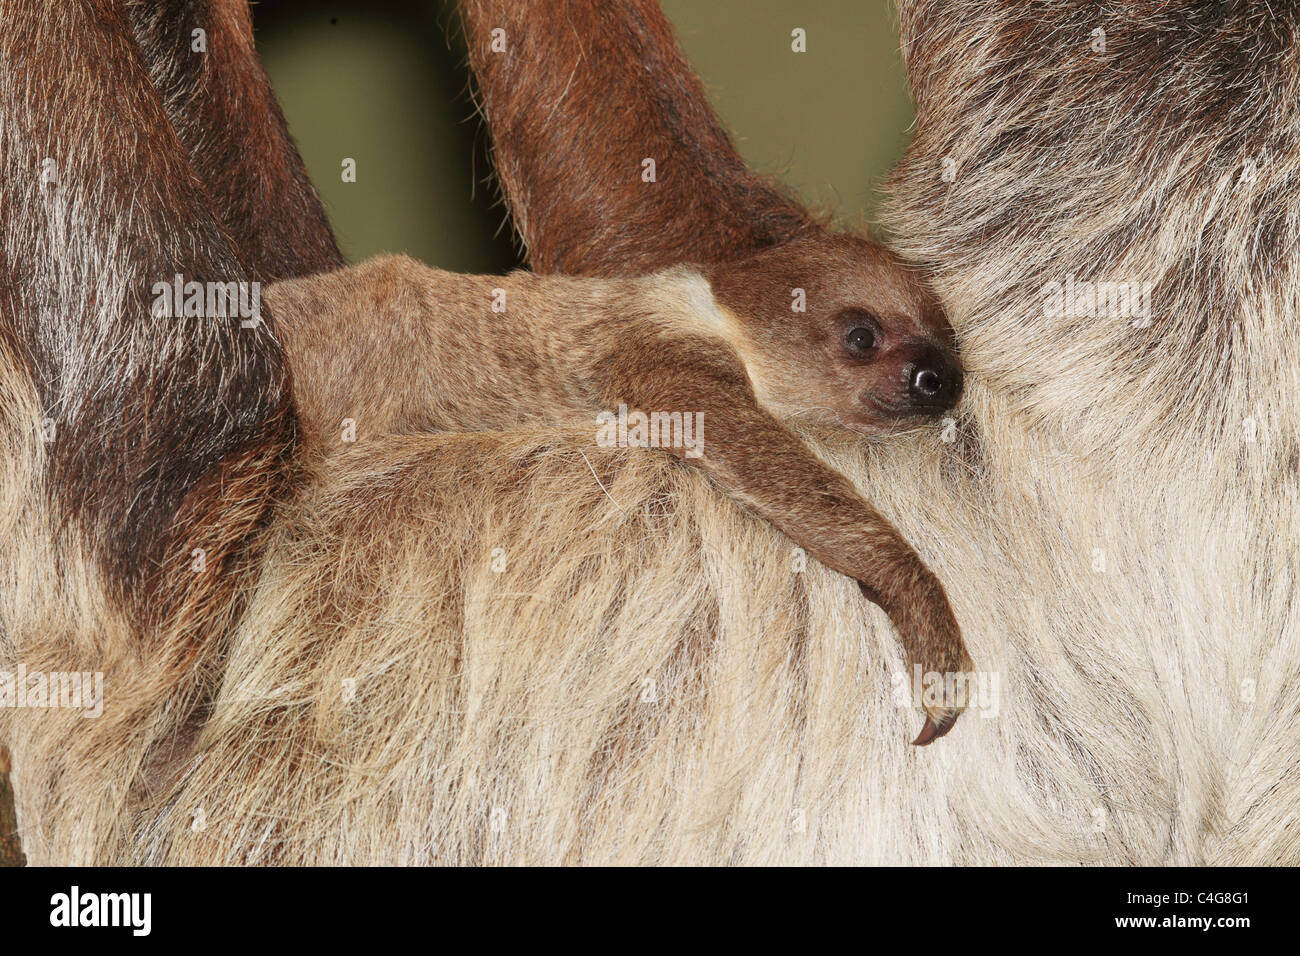 Linnaeus's two-toed sloth and cub / Choloepus didactylus Stock Photo